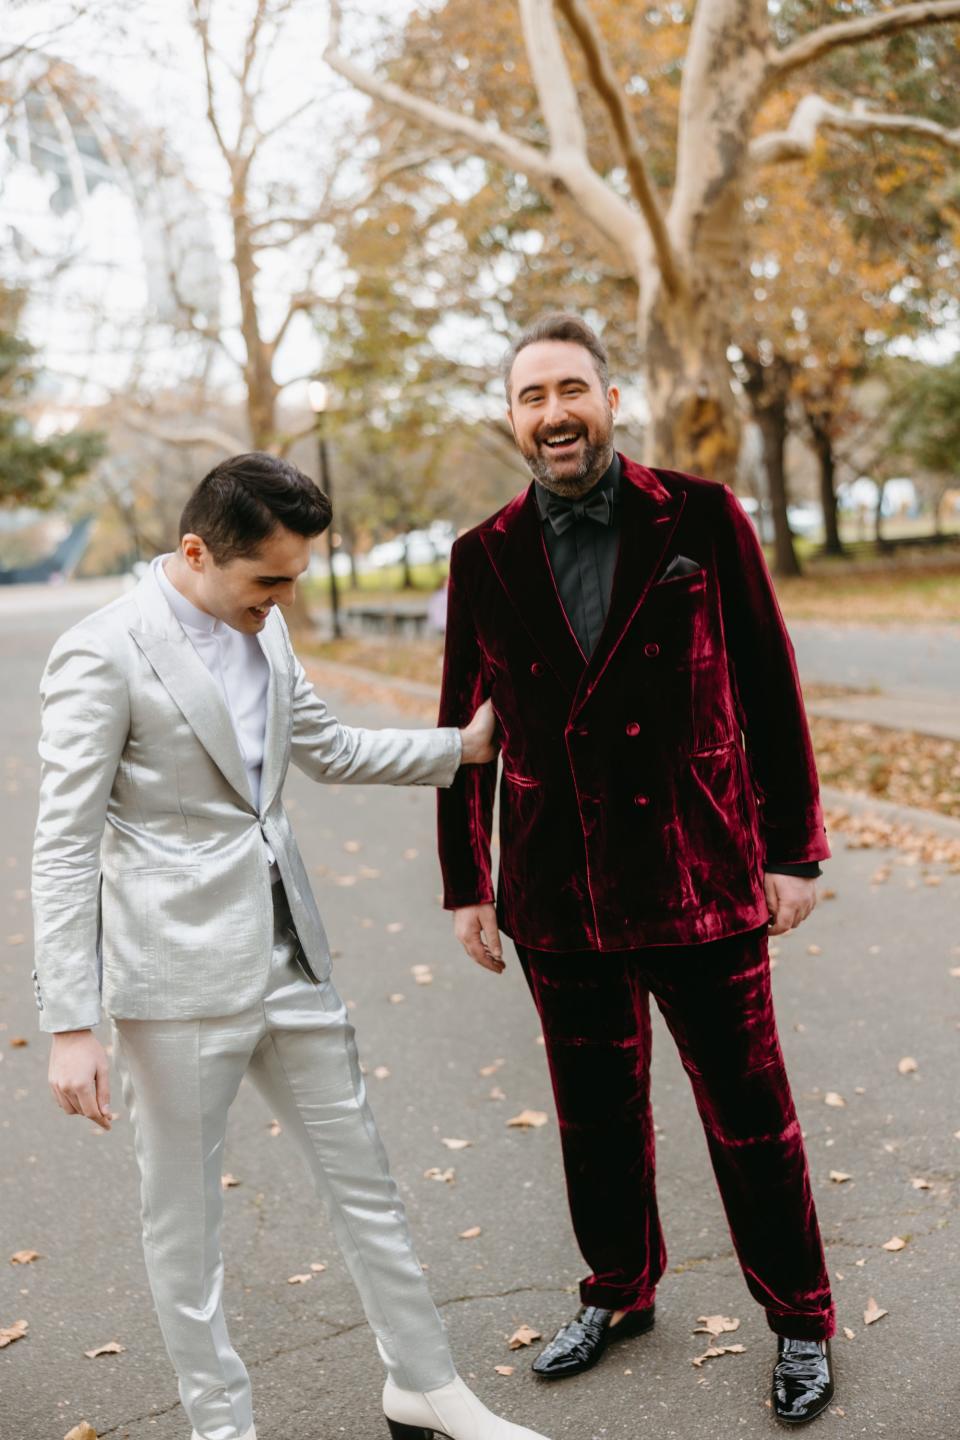 Two grooms in colorful suits stand in a park.